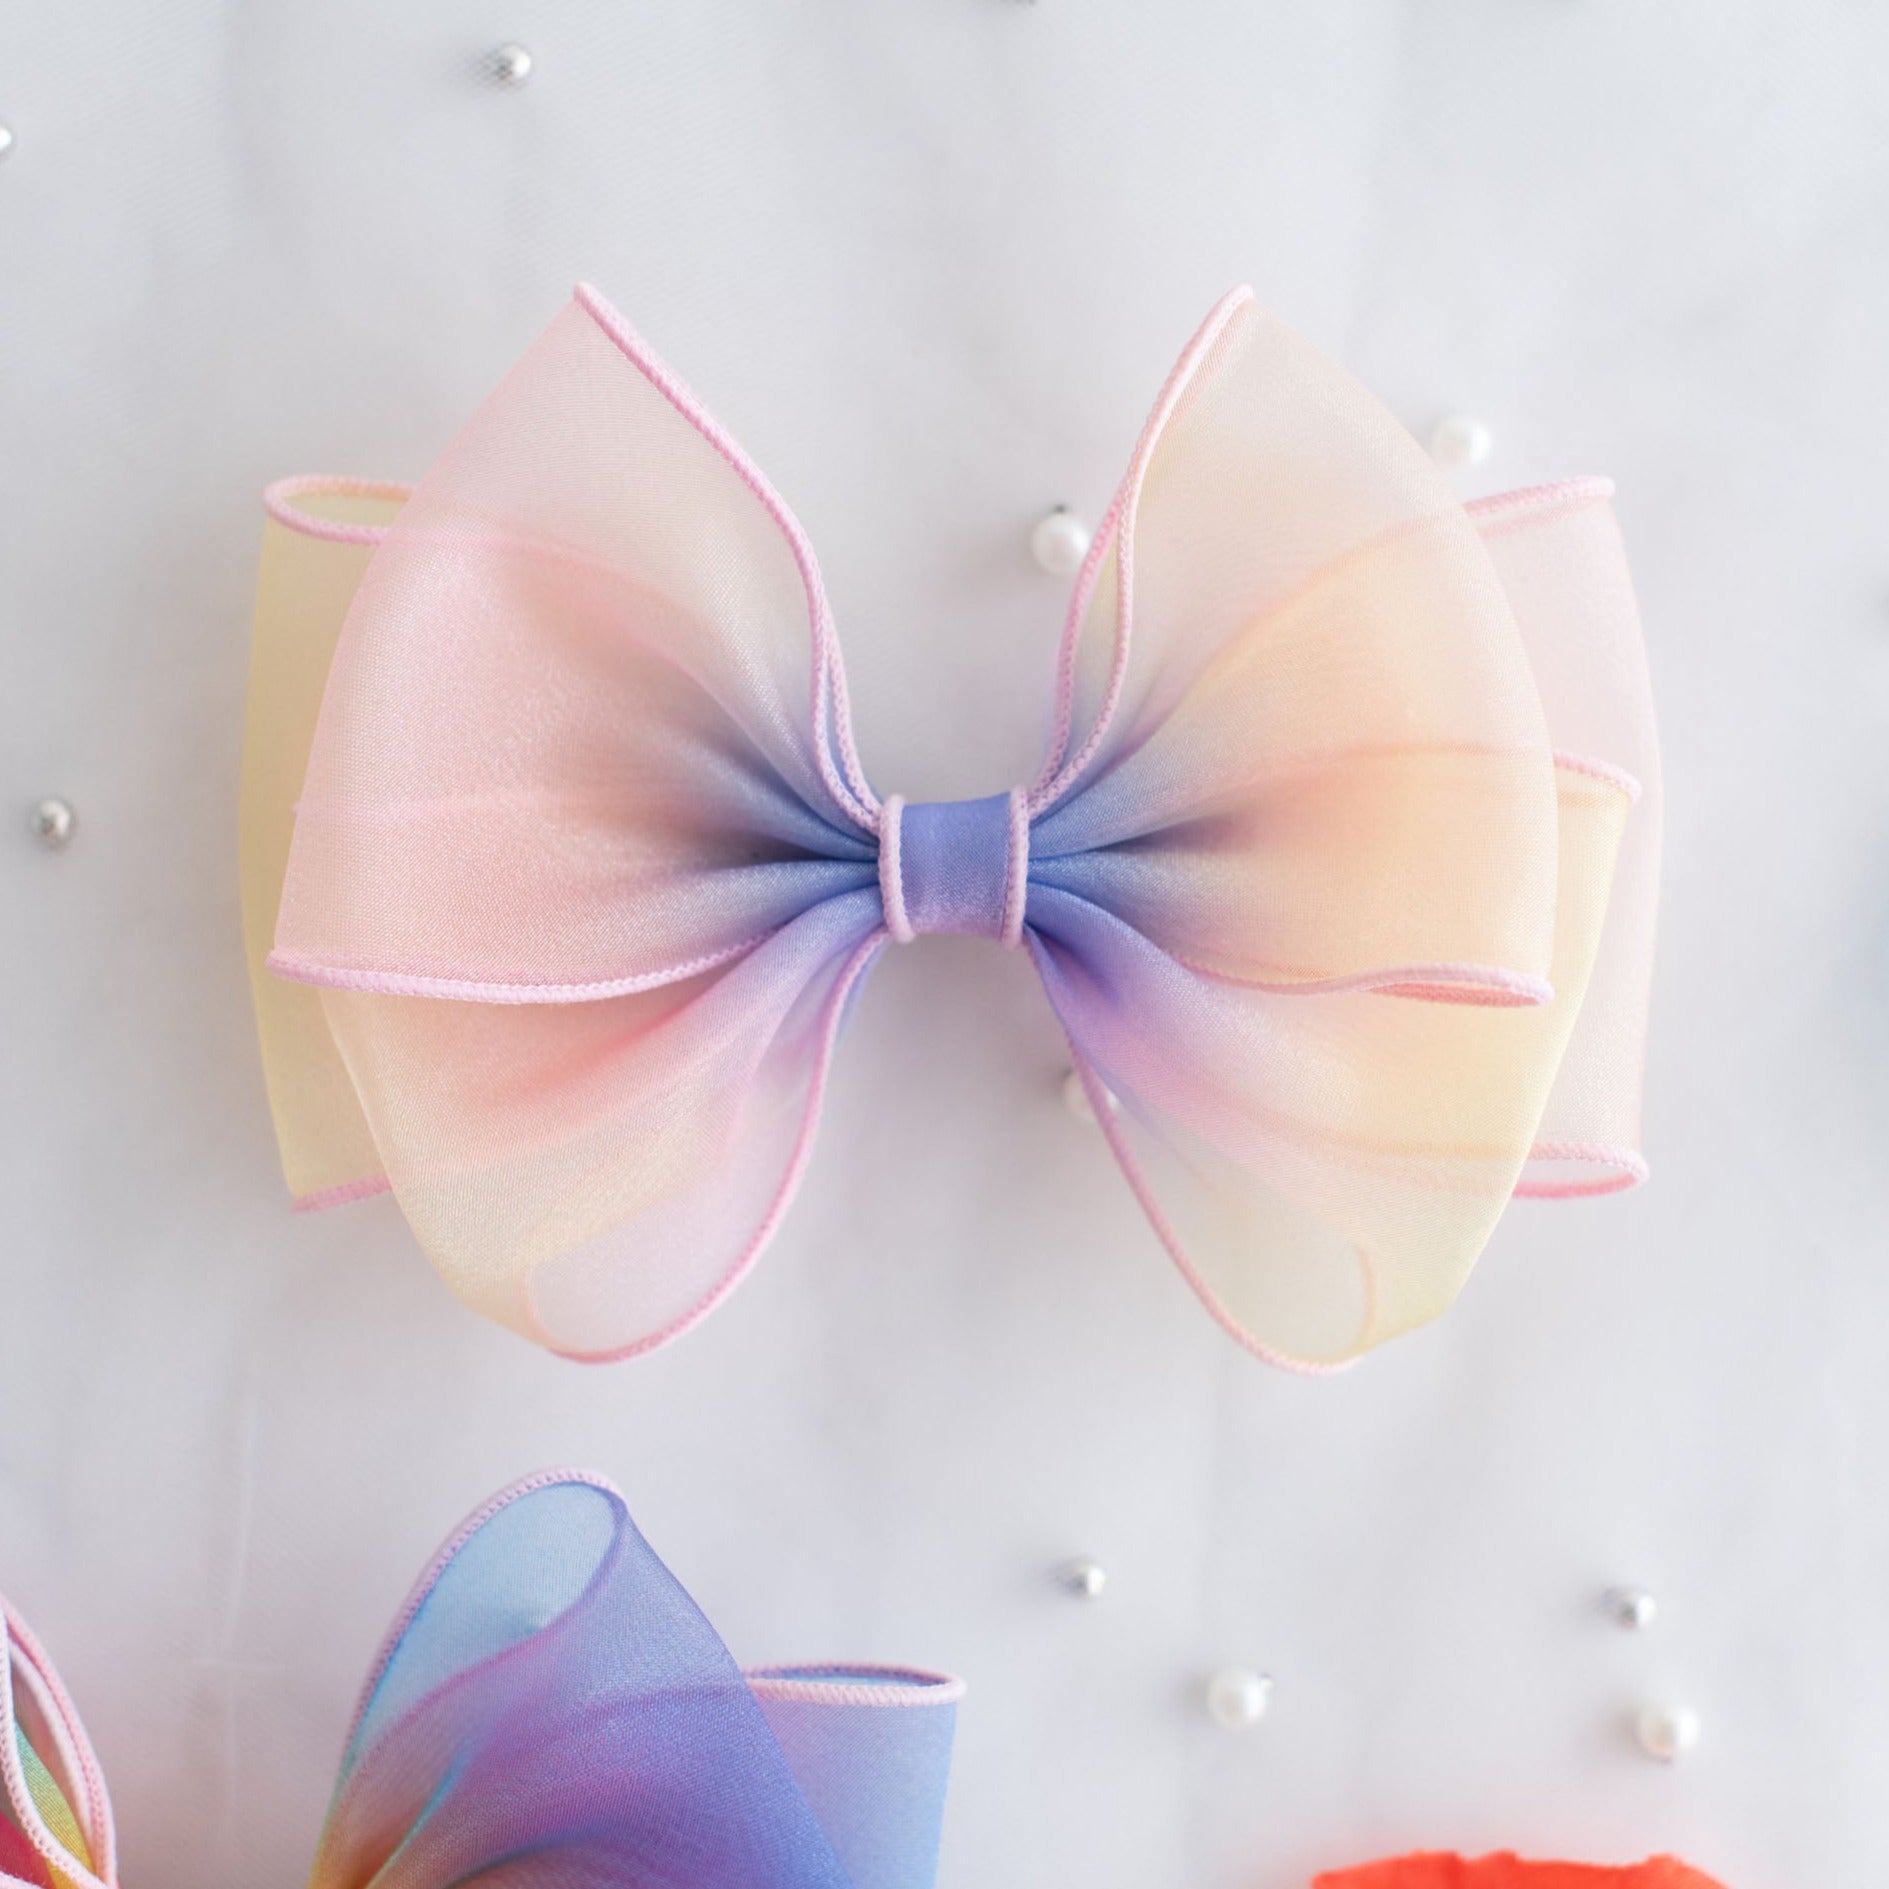 Summer Crystal Organza Large Bow Hair Clip - For Girls and Women